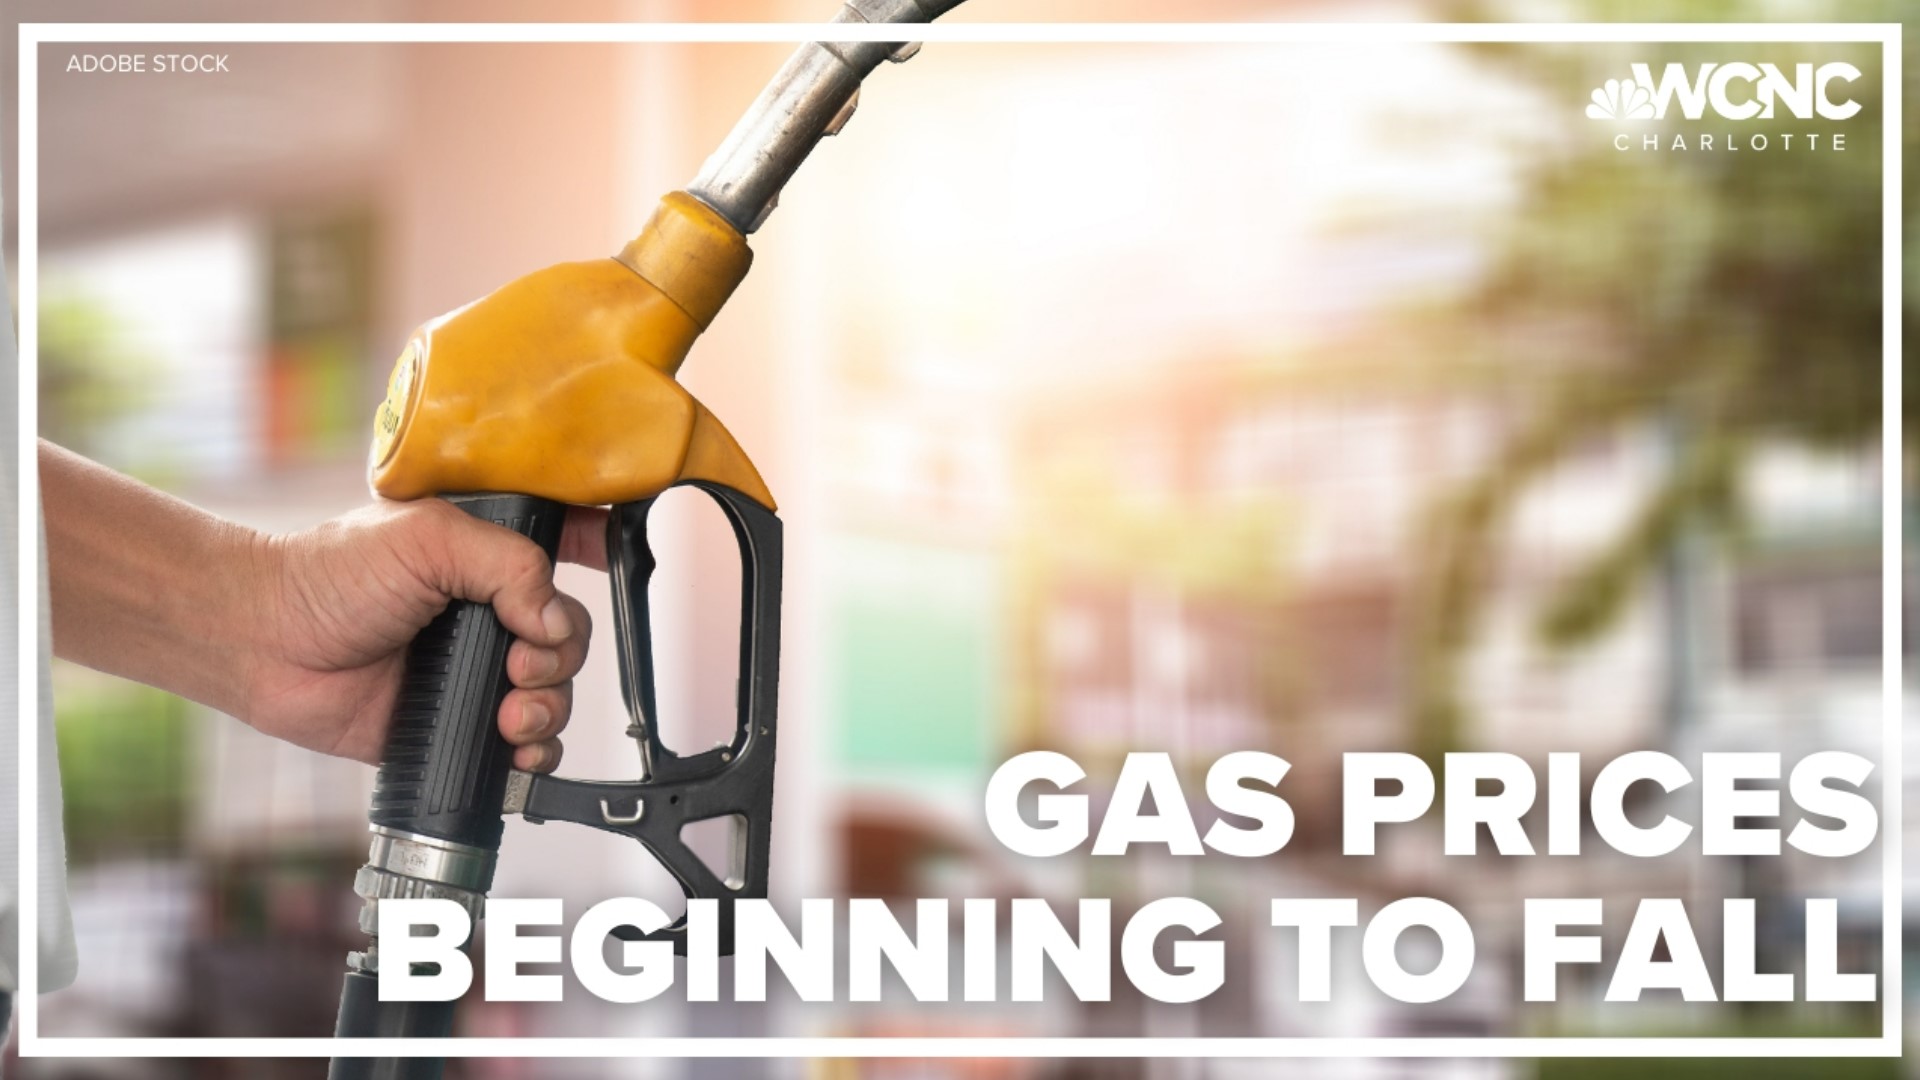 While gas prices are starting to trickle down a bit, they're still high as the summer travel season takes off.